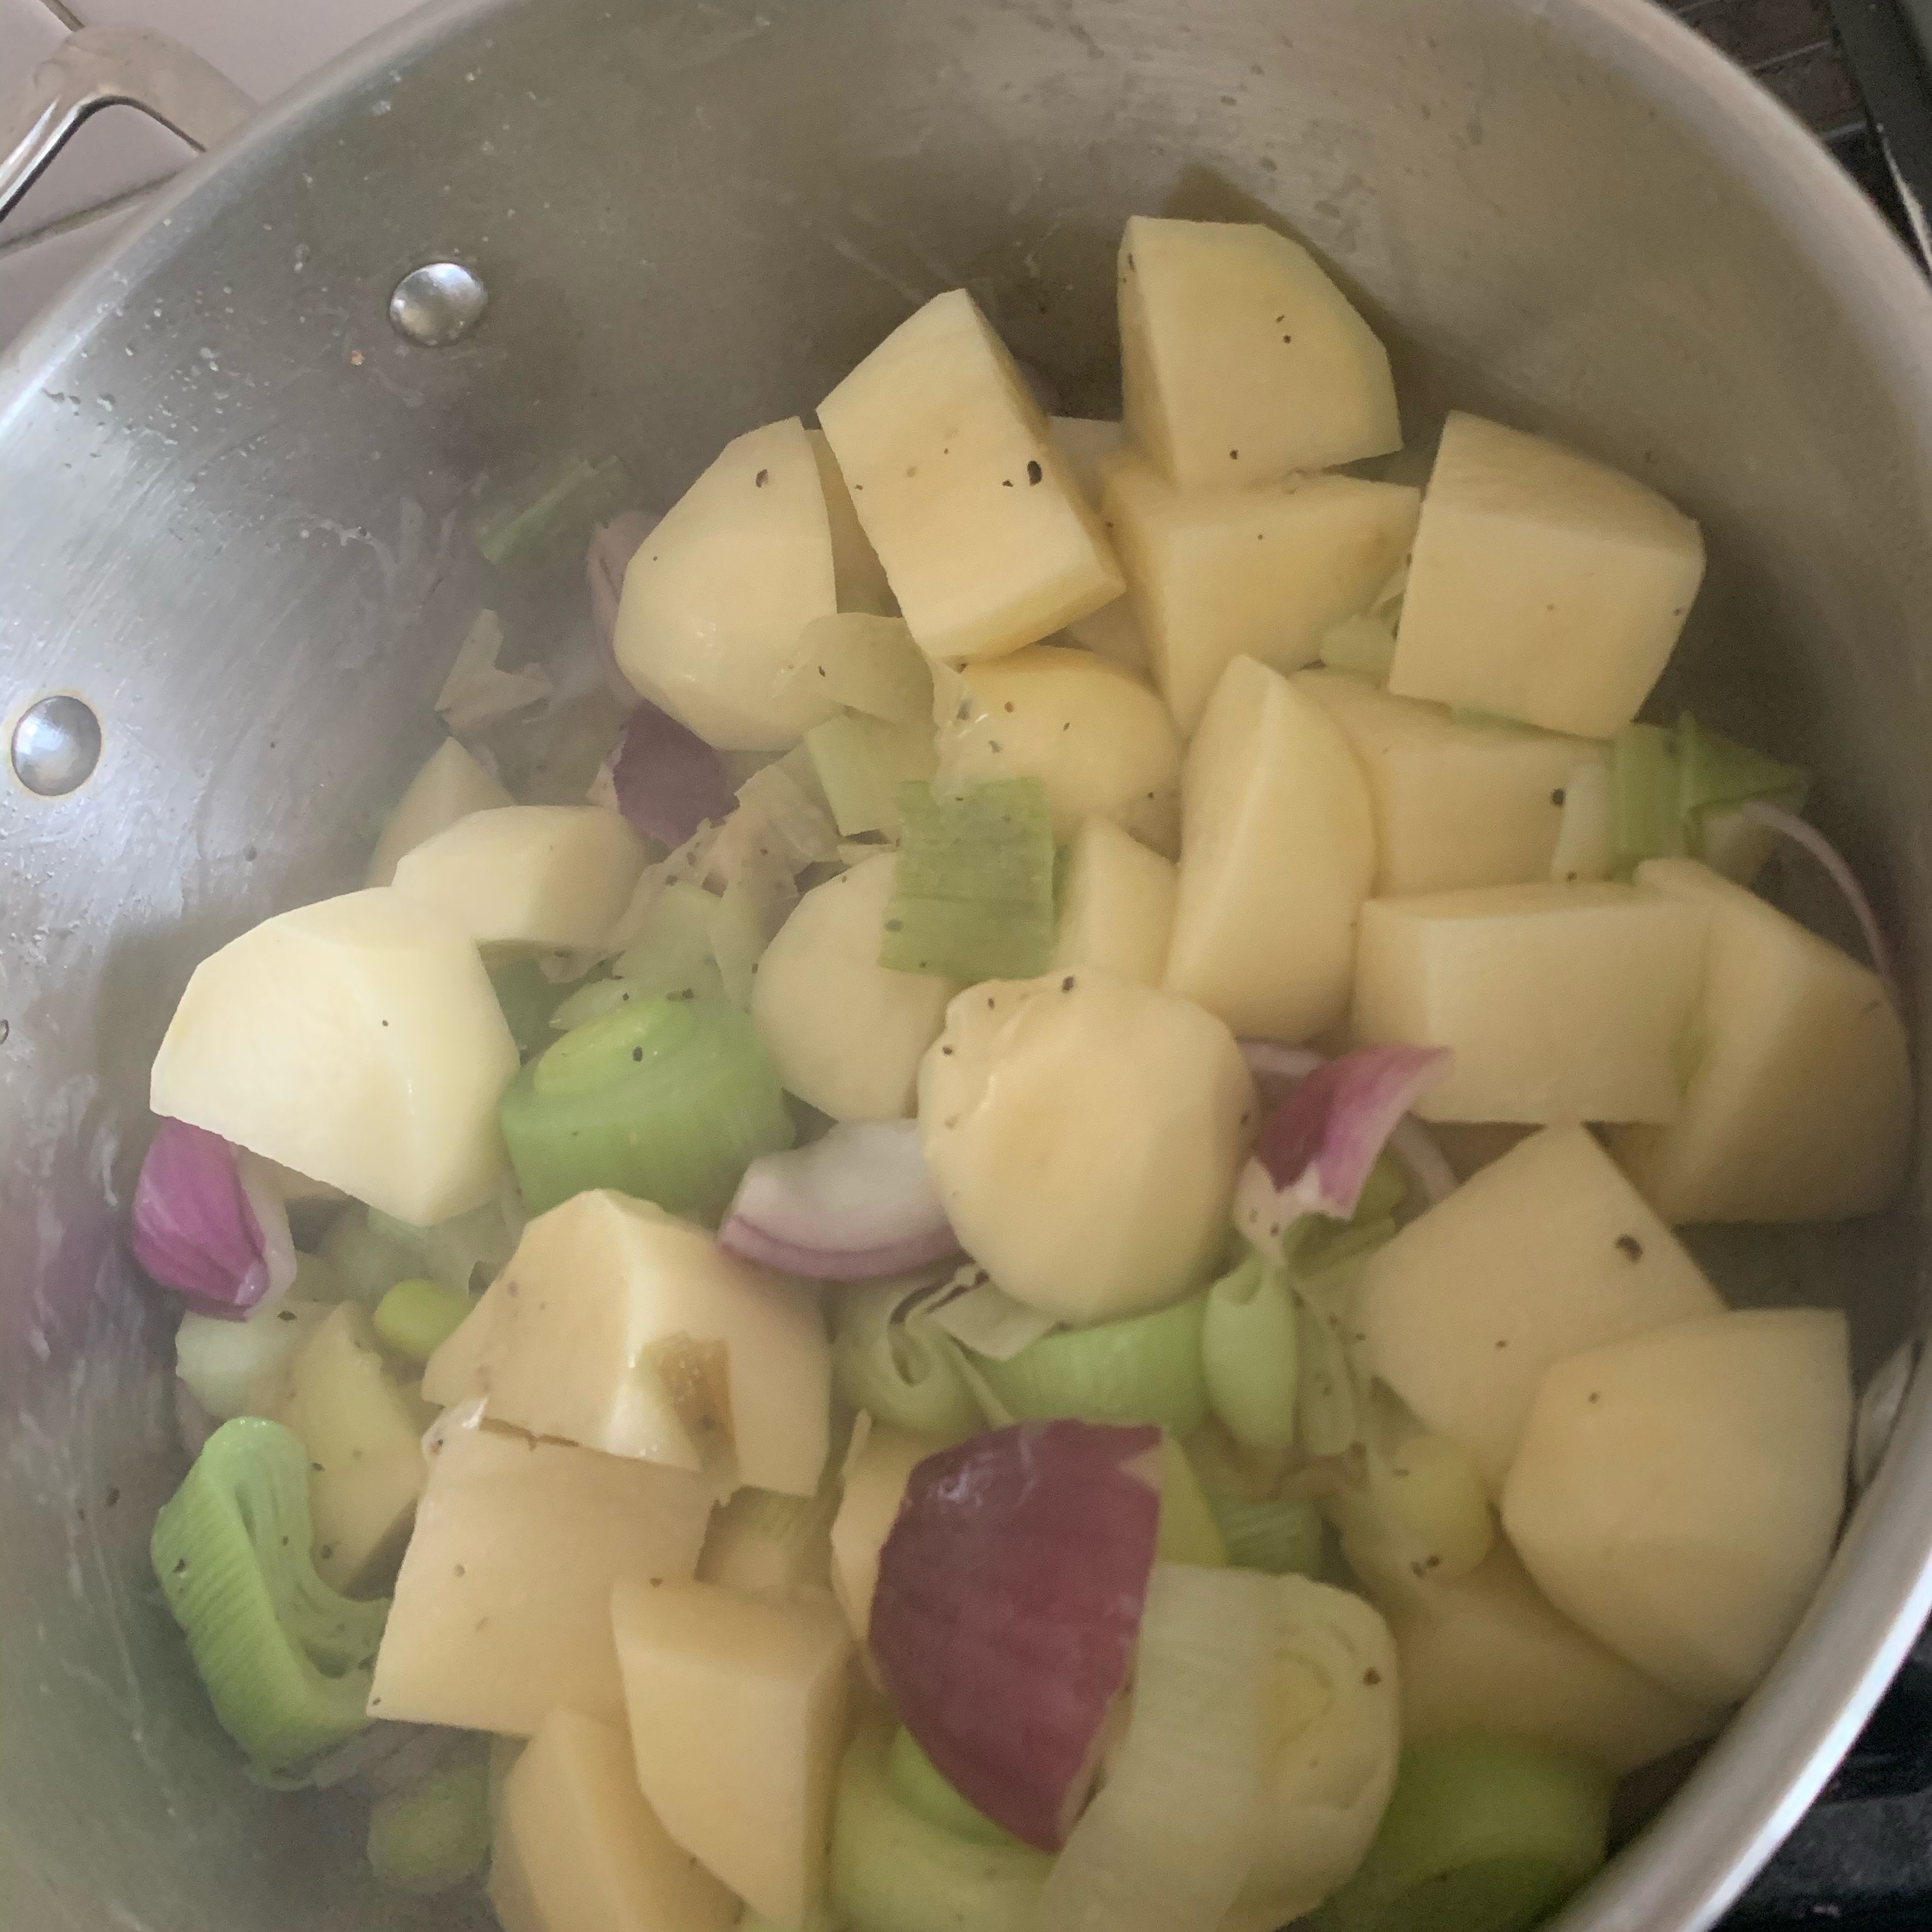 Add in the potatoes and give it a nice mix!